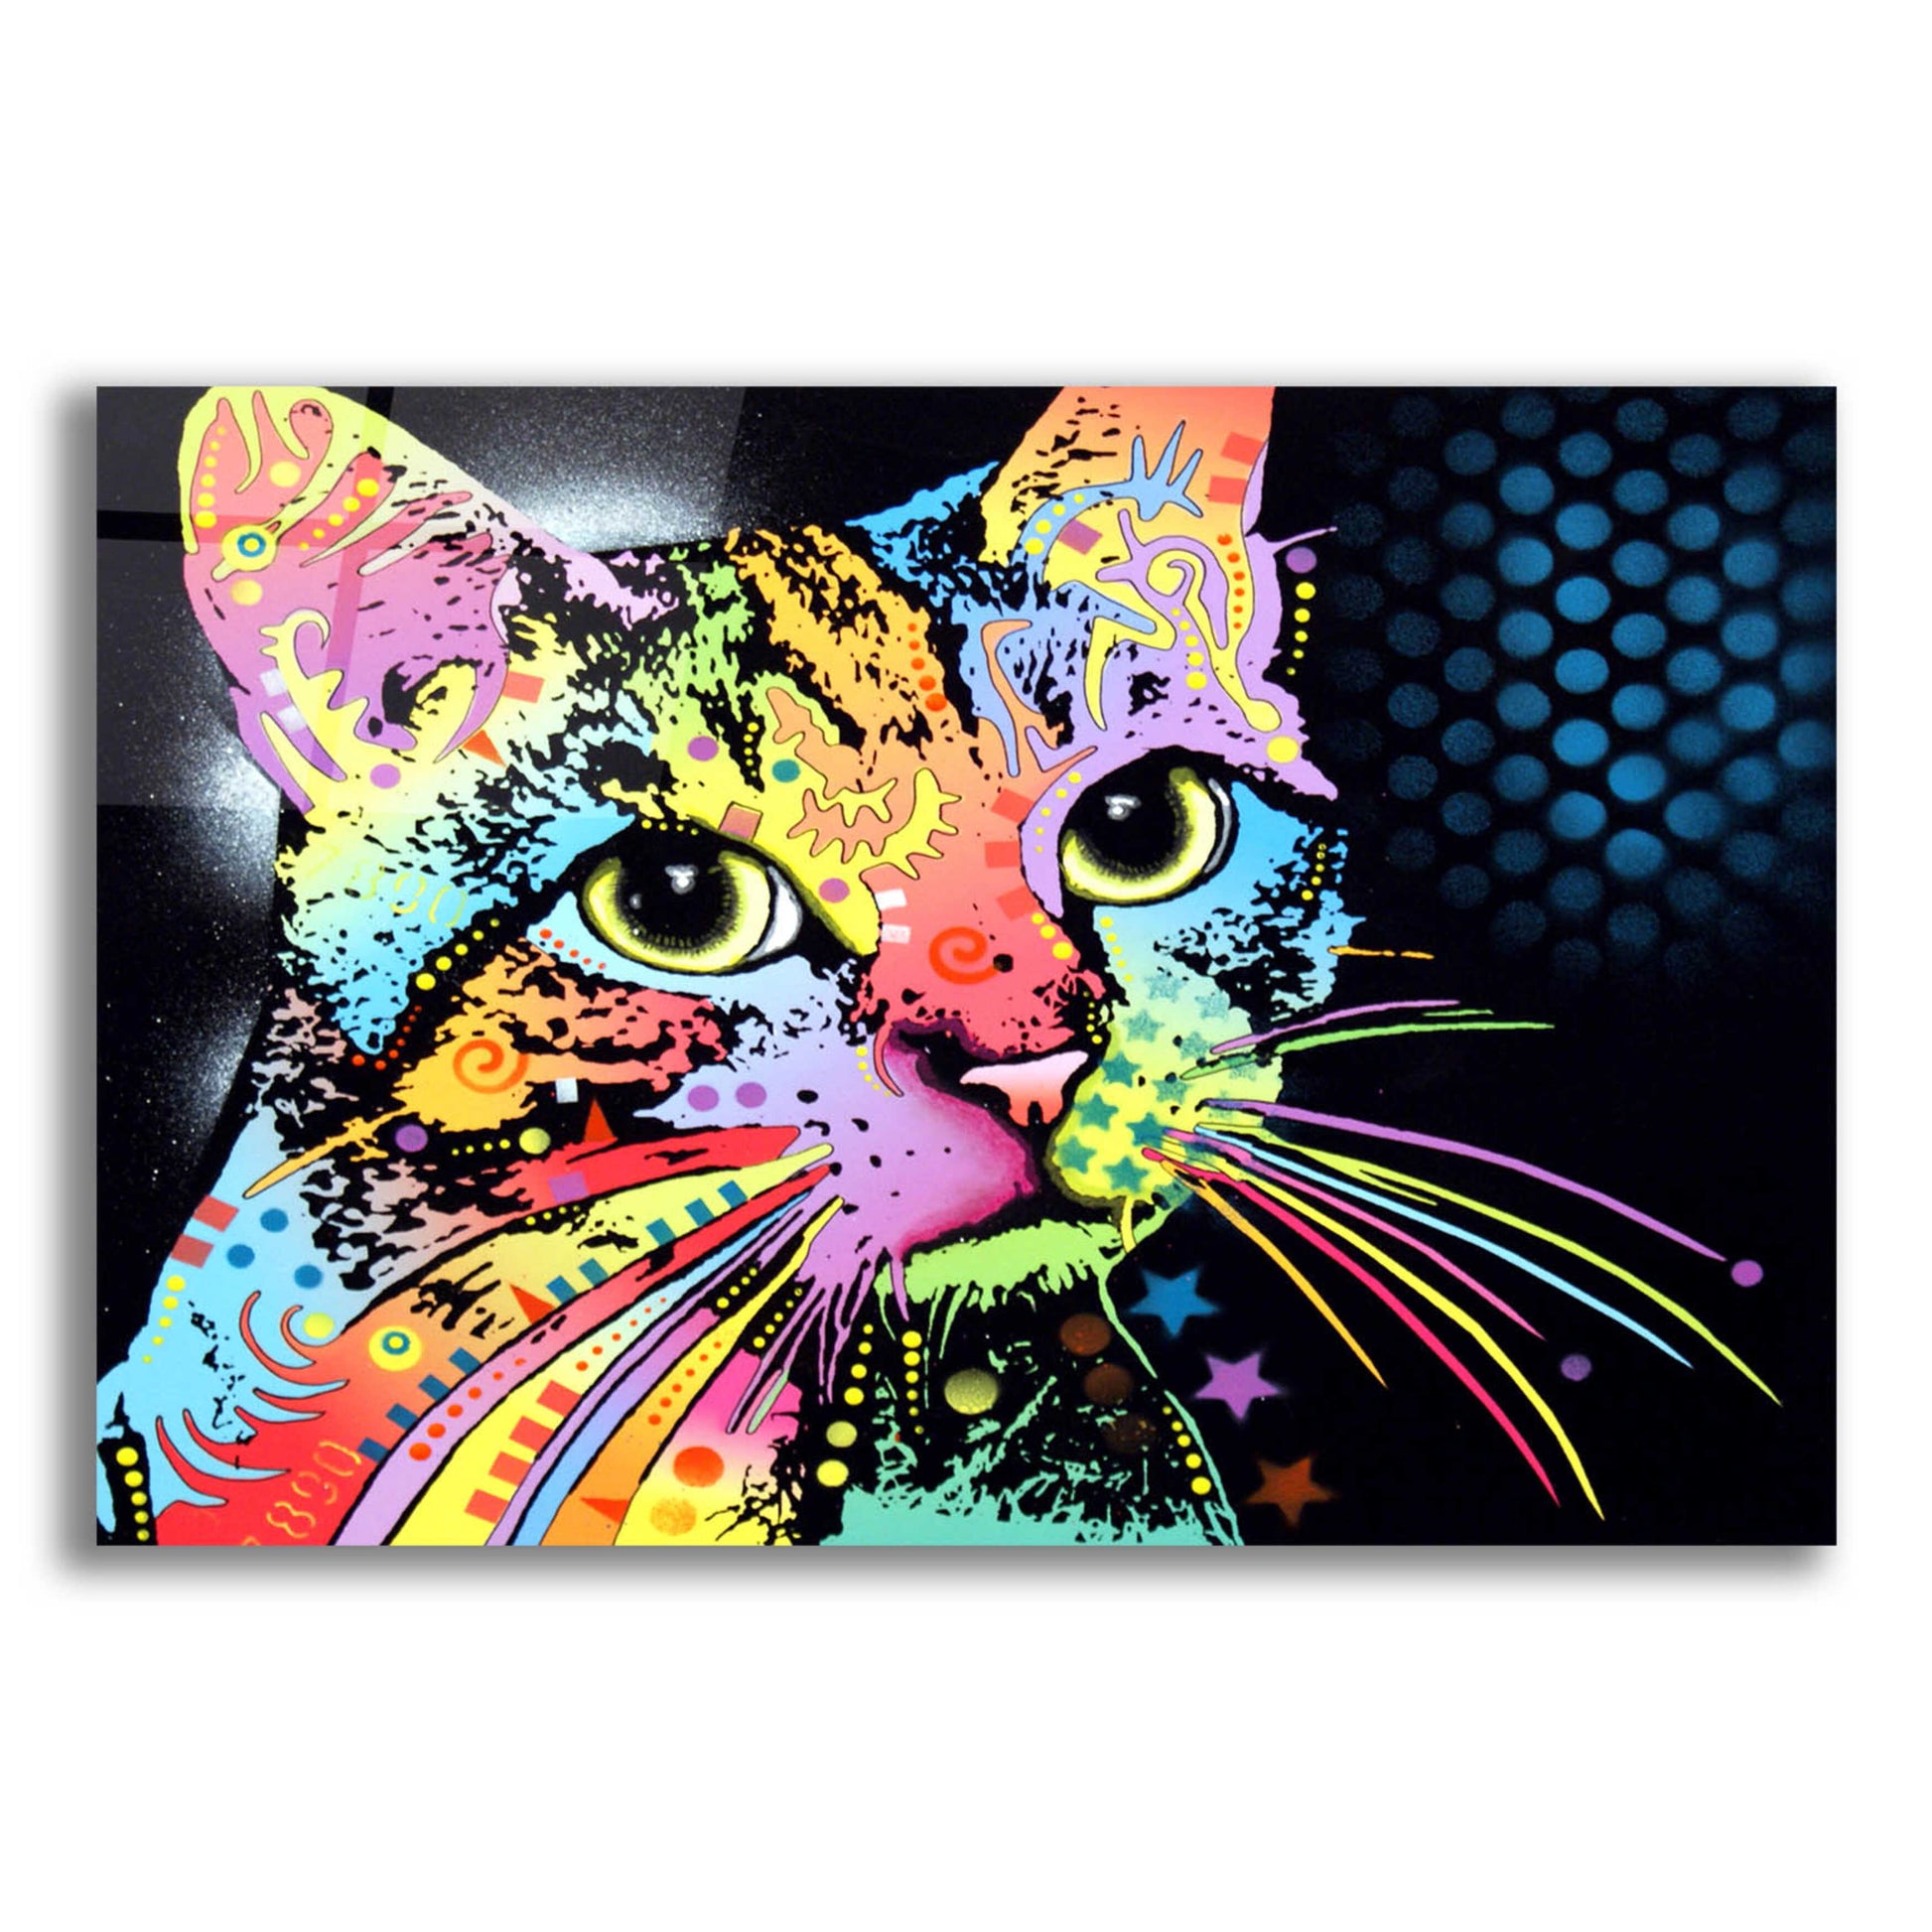 Epic Art 'Catillac New' by Dean Russo, Acrylic Glass Wall Art,16x12